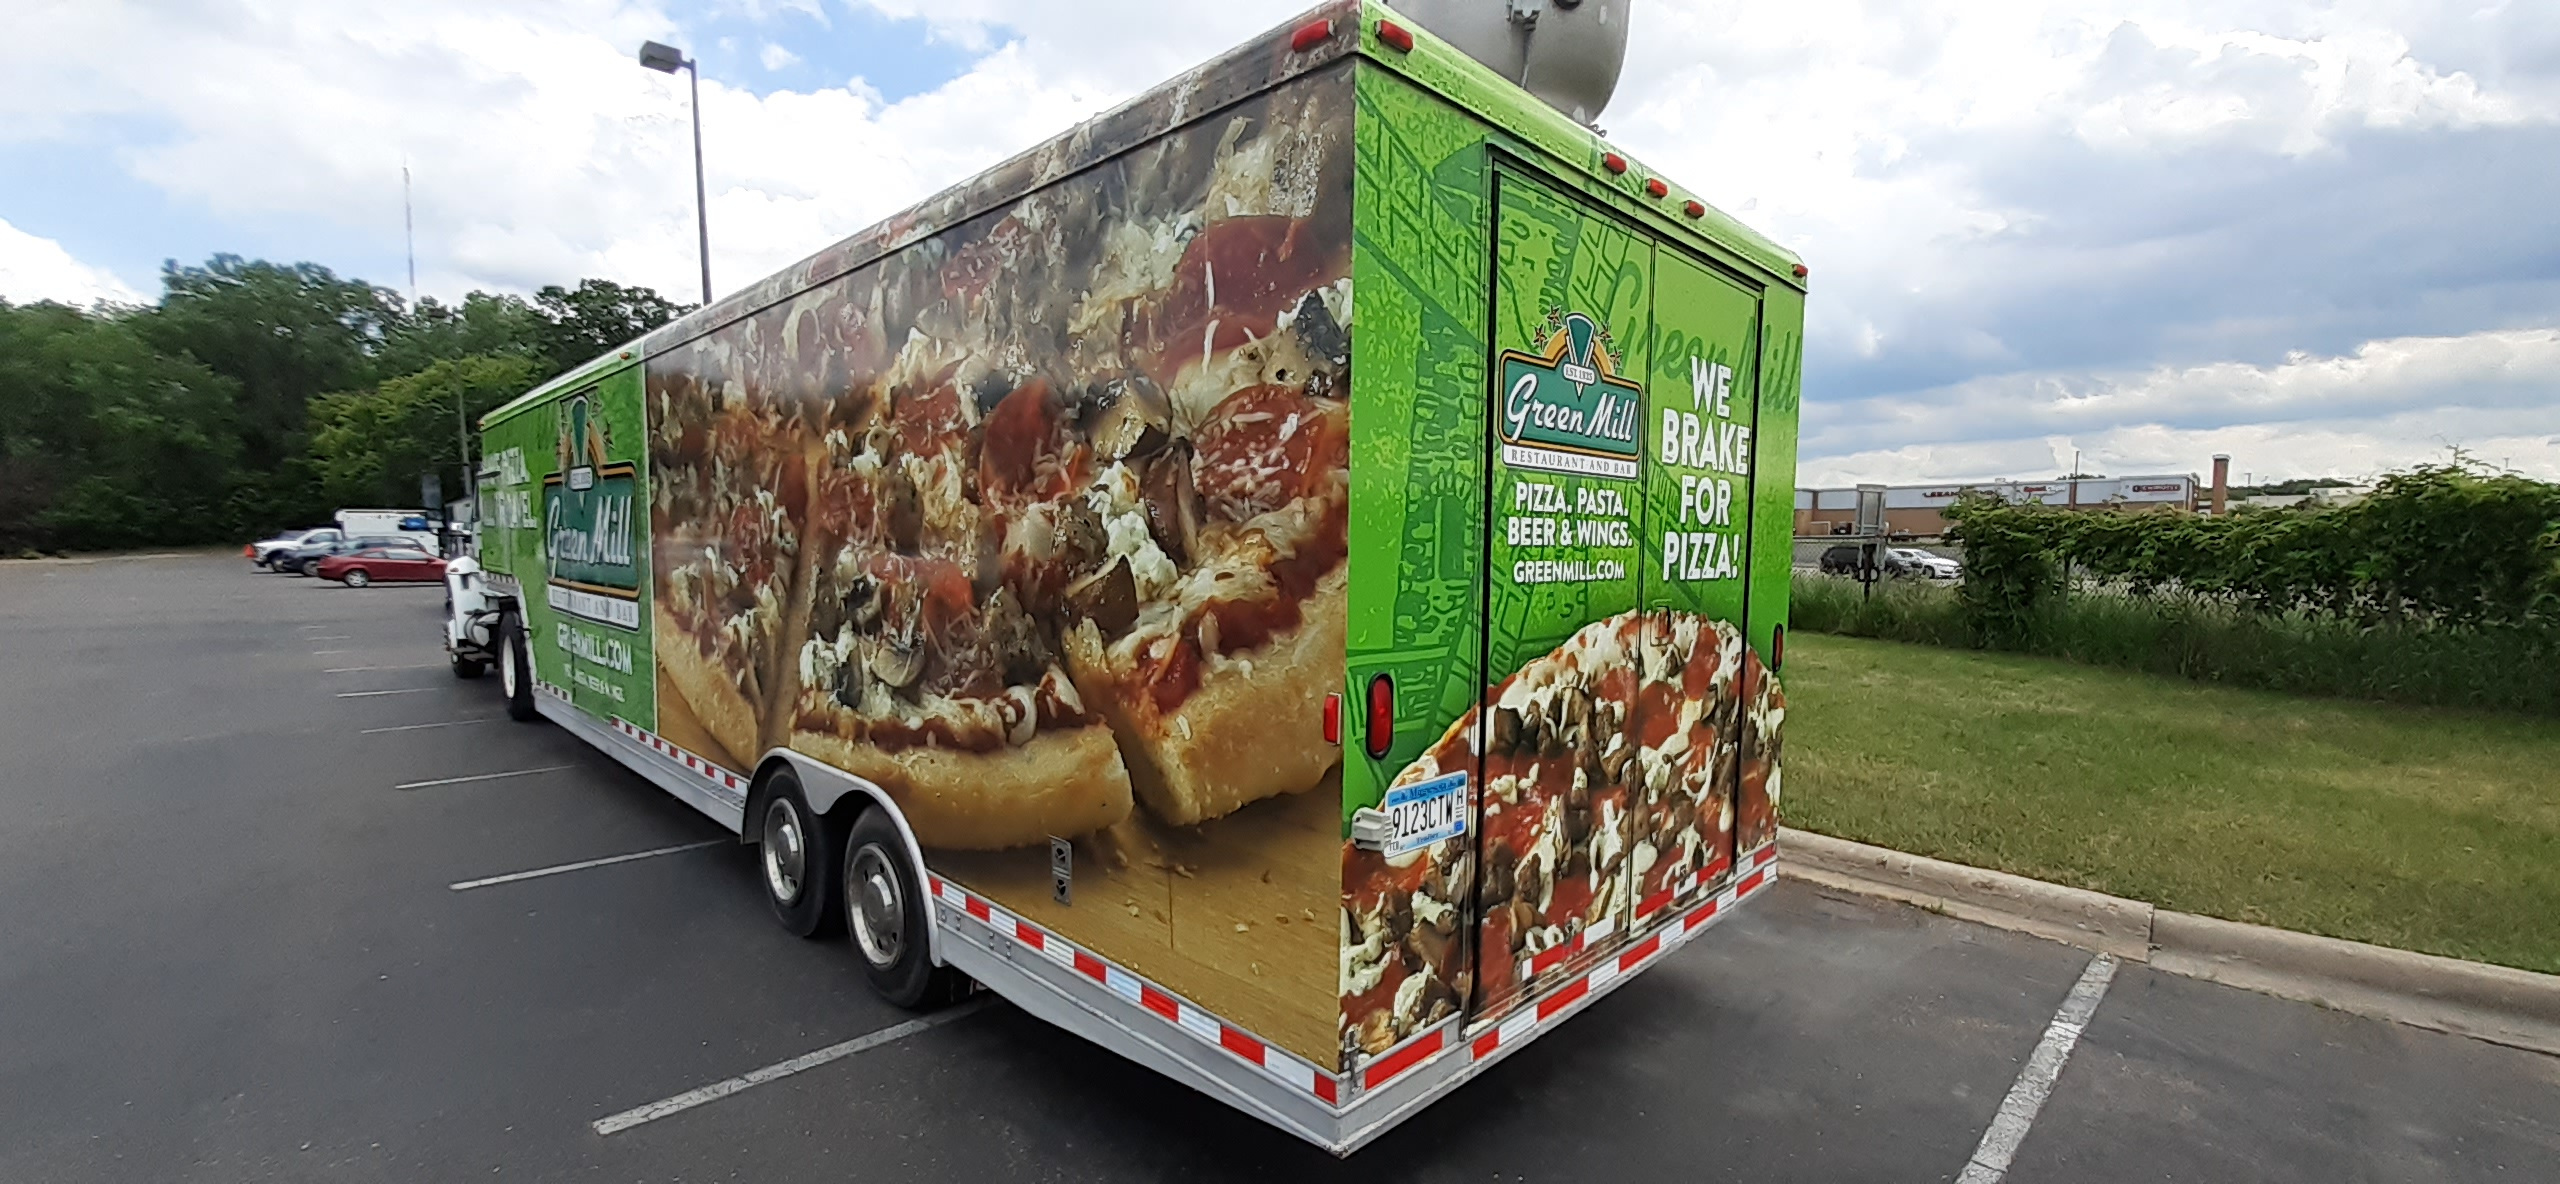 Vehicle wrap for Green Mill trailer